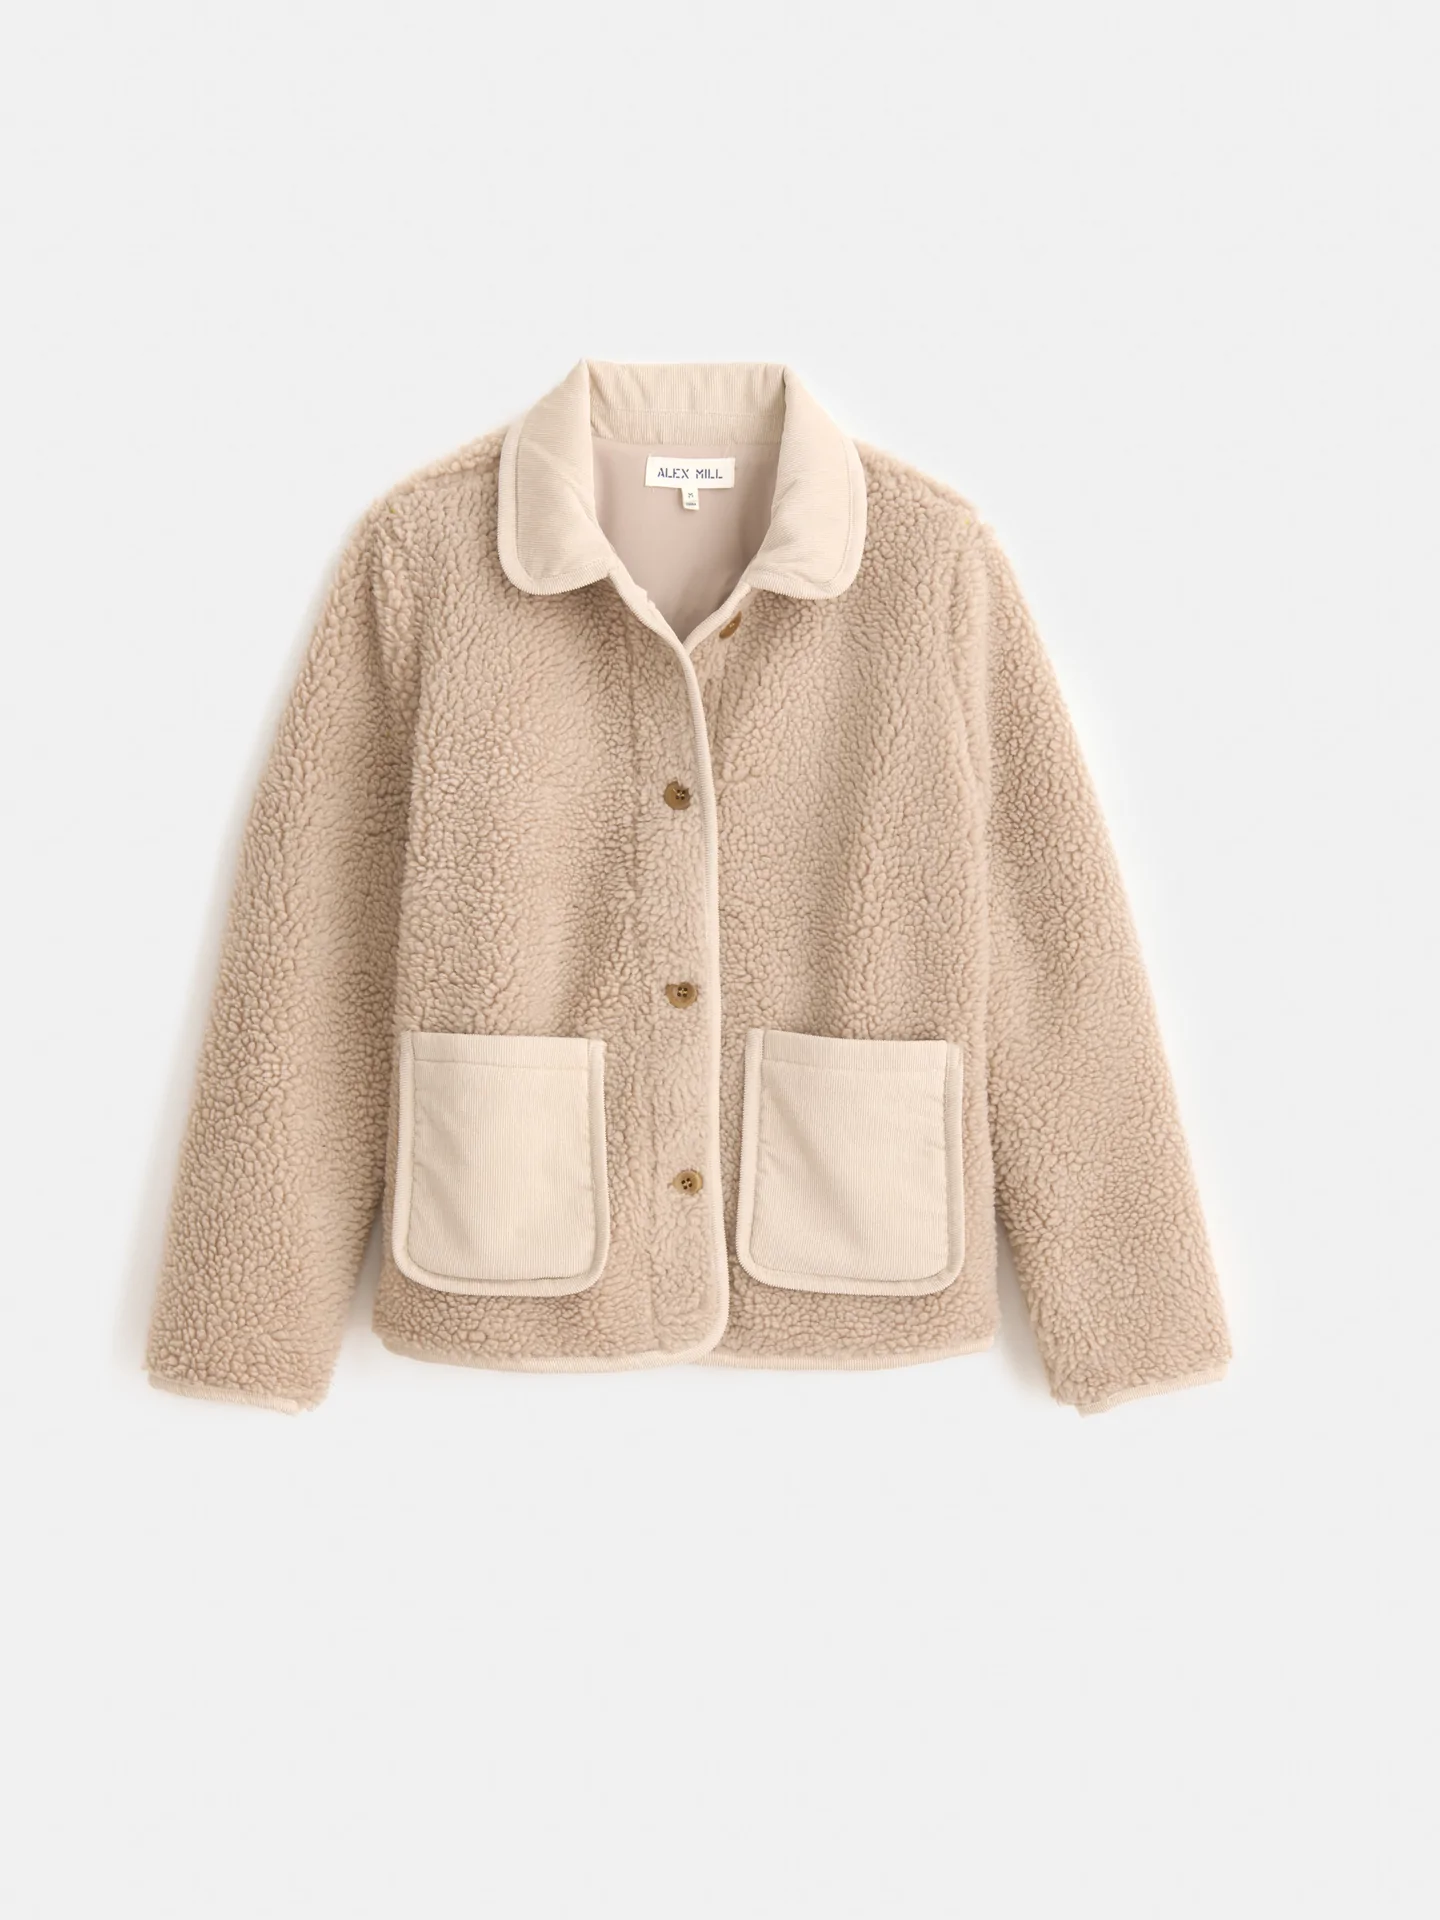 The Sell Out: Alex Mill Sherpa Work Jacket